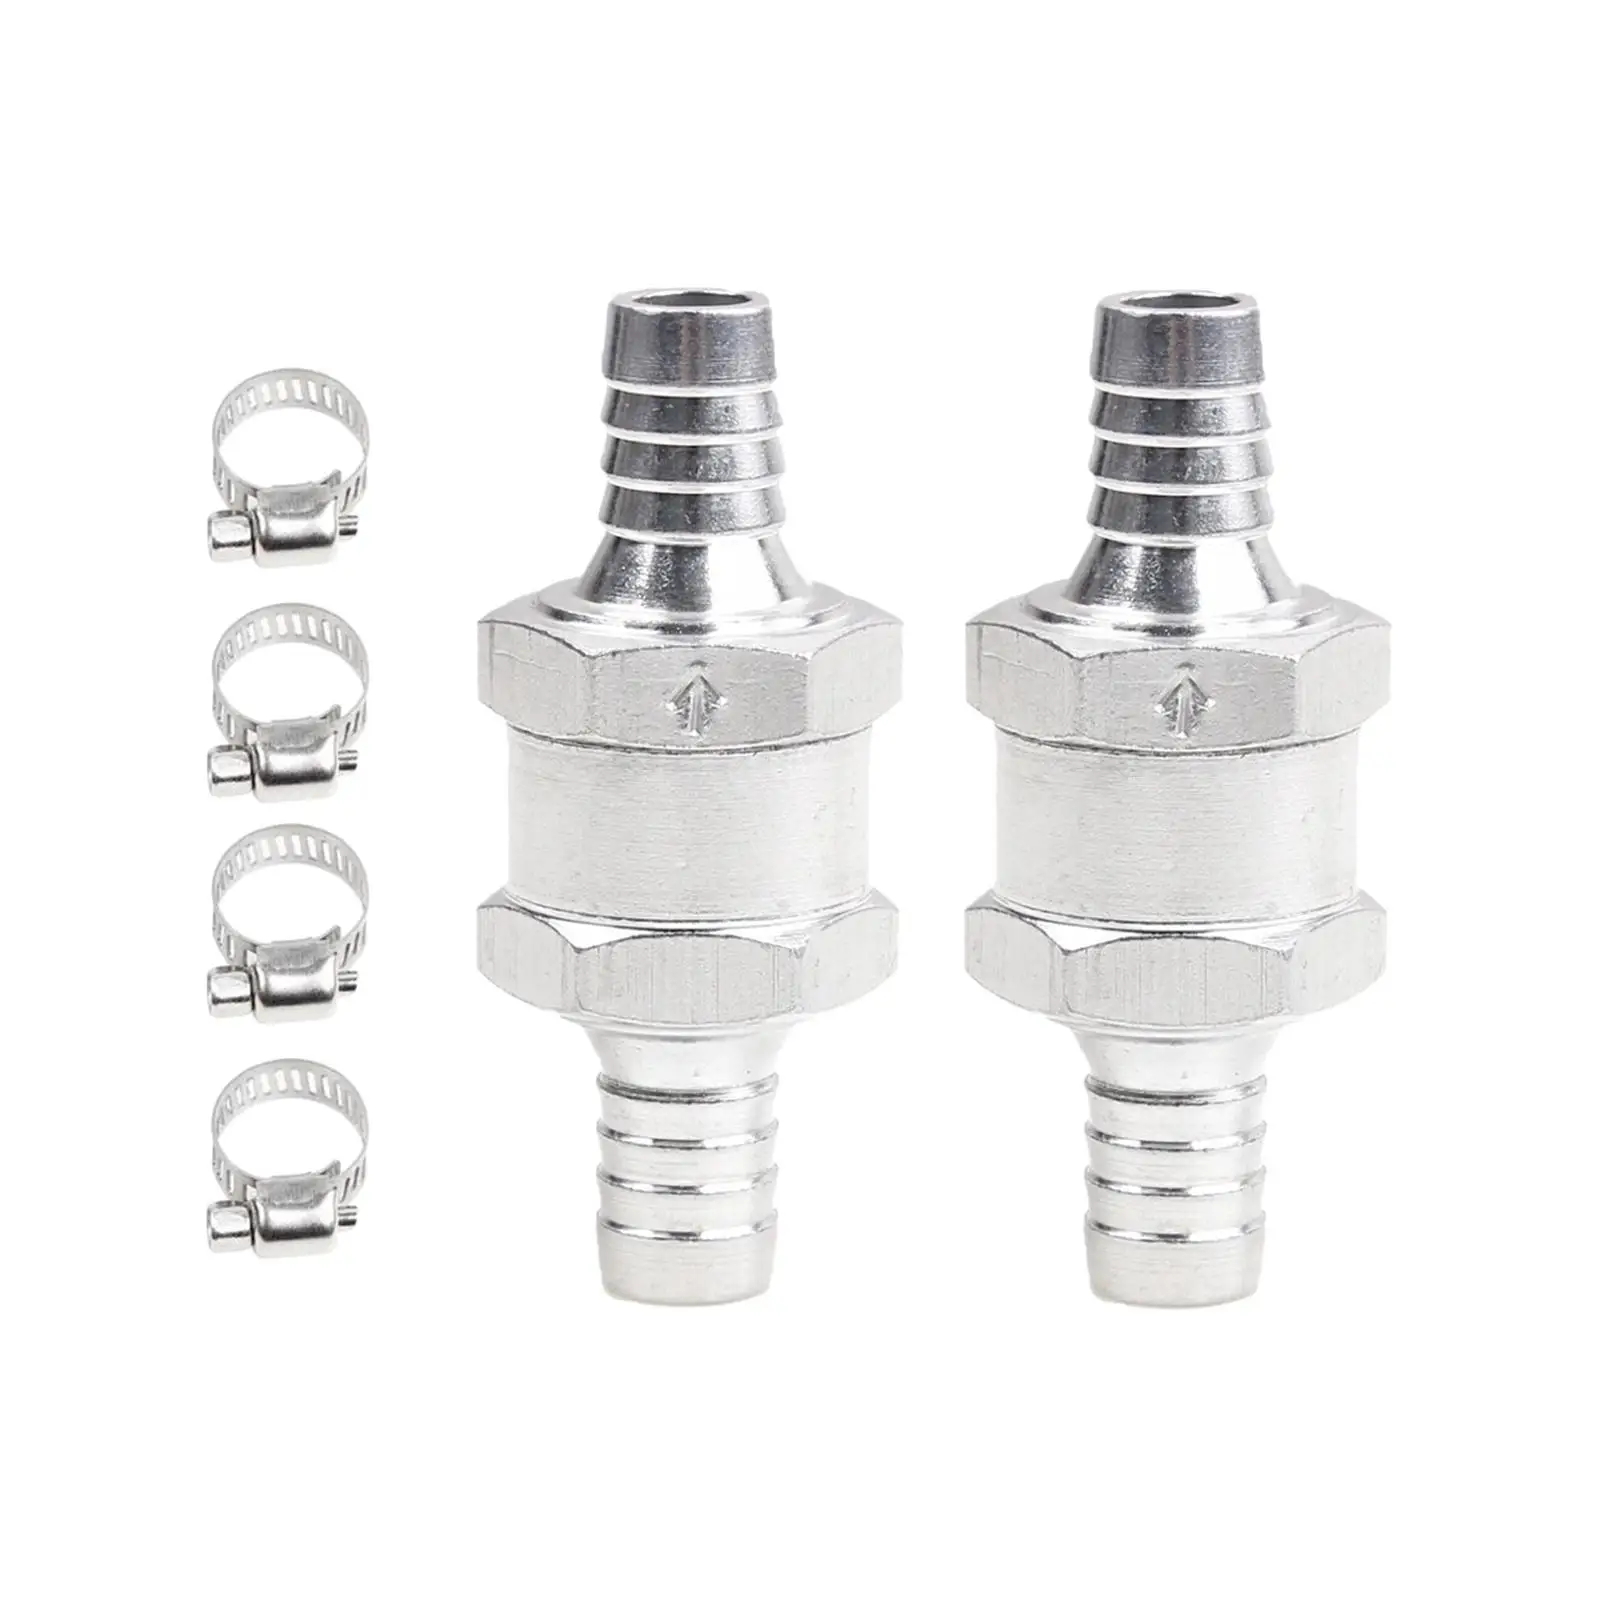 2x Non Return Check Valve Aluminium with 4 Hose Clamps Clips Car Accessory for Petrol Fuel Line Oil Water Gasoline Ships